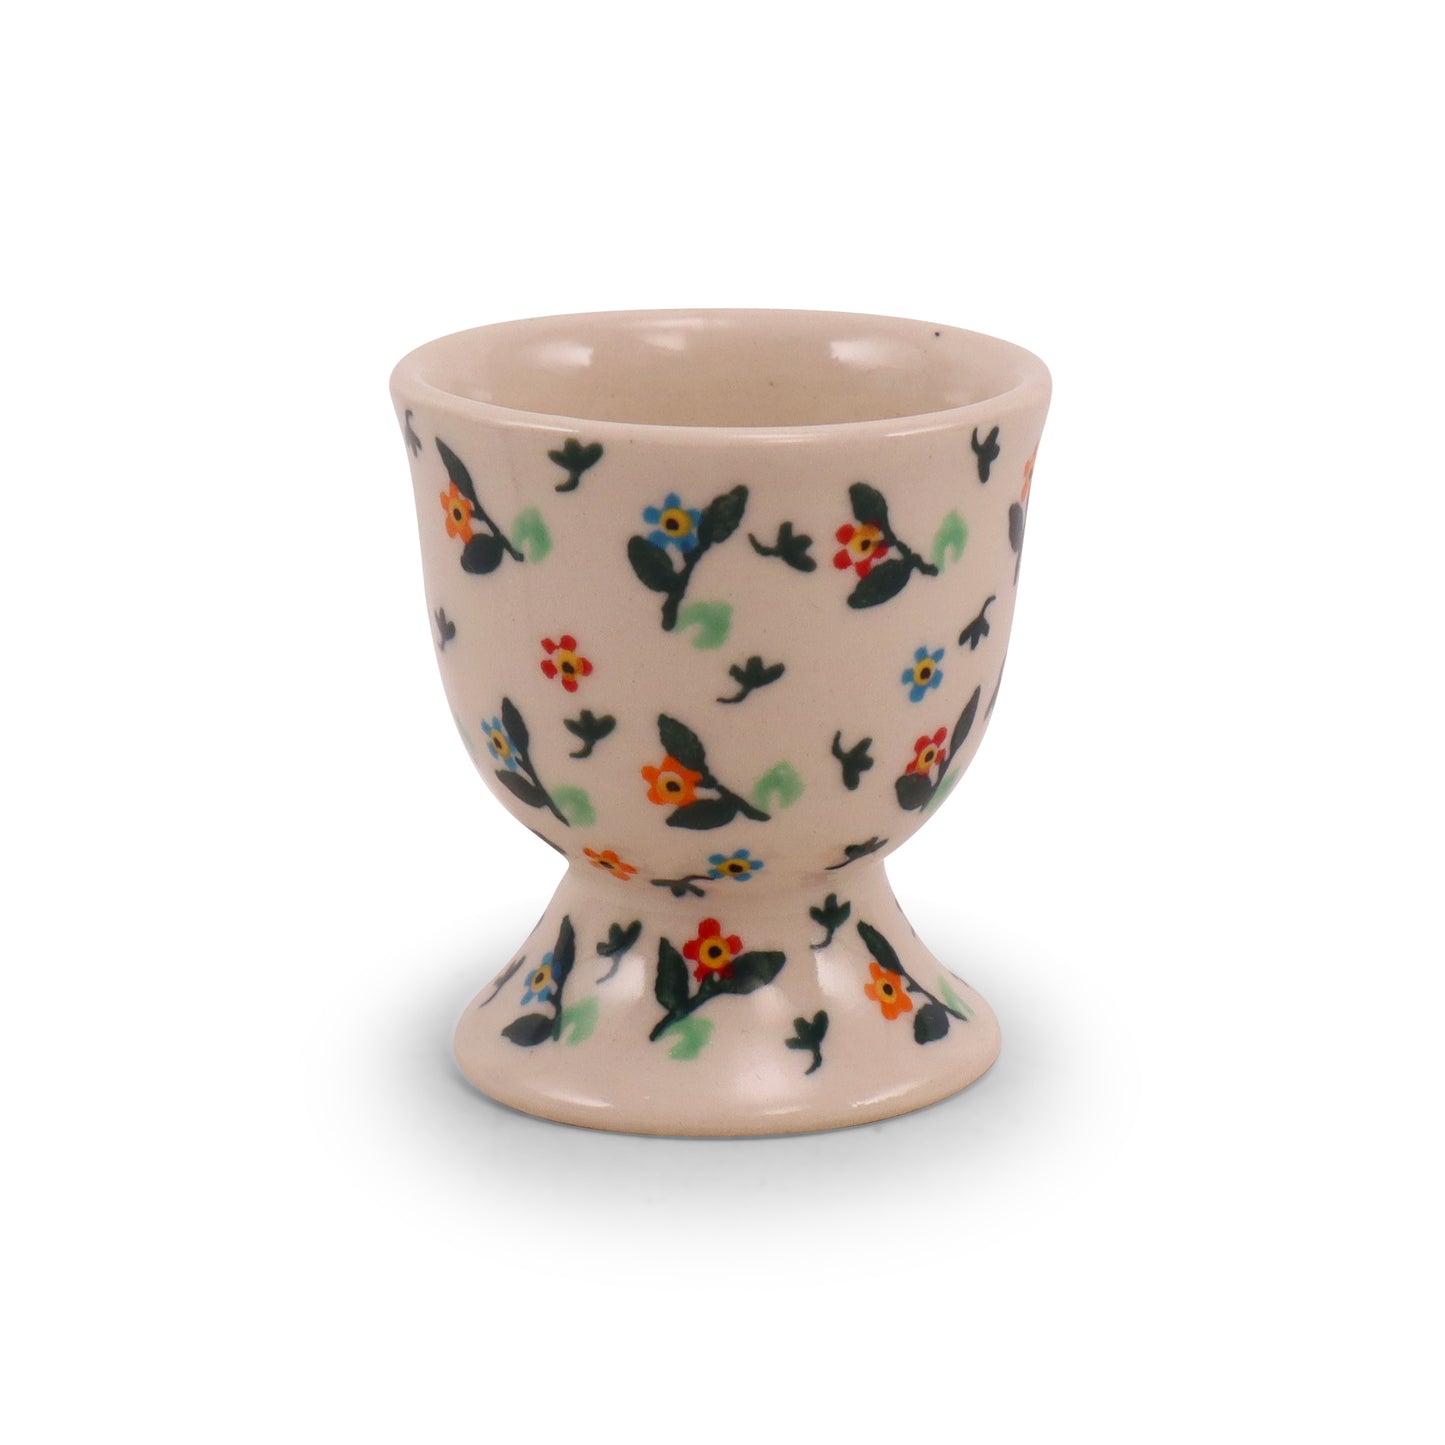 2"x3" Egg Cup. Pattern: 0209